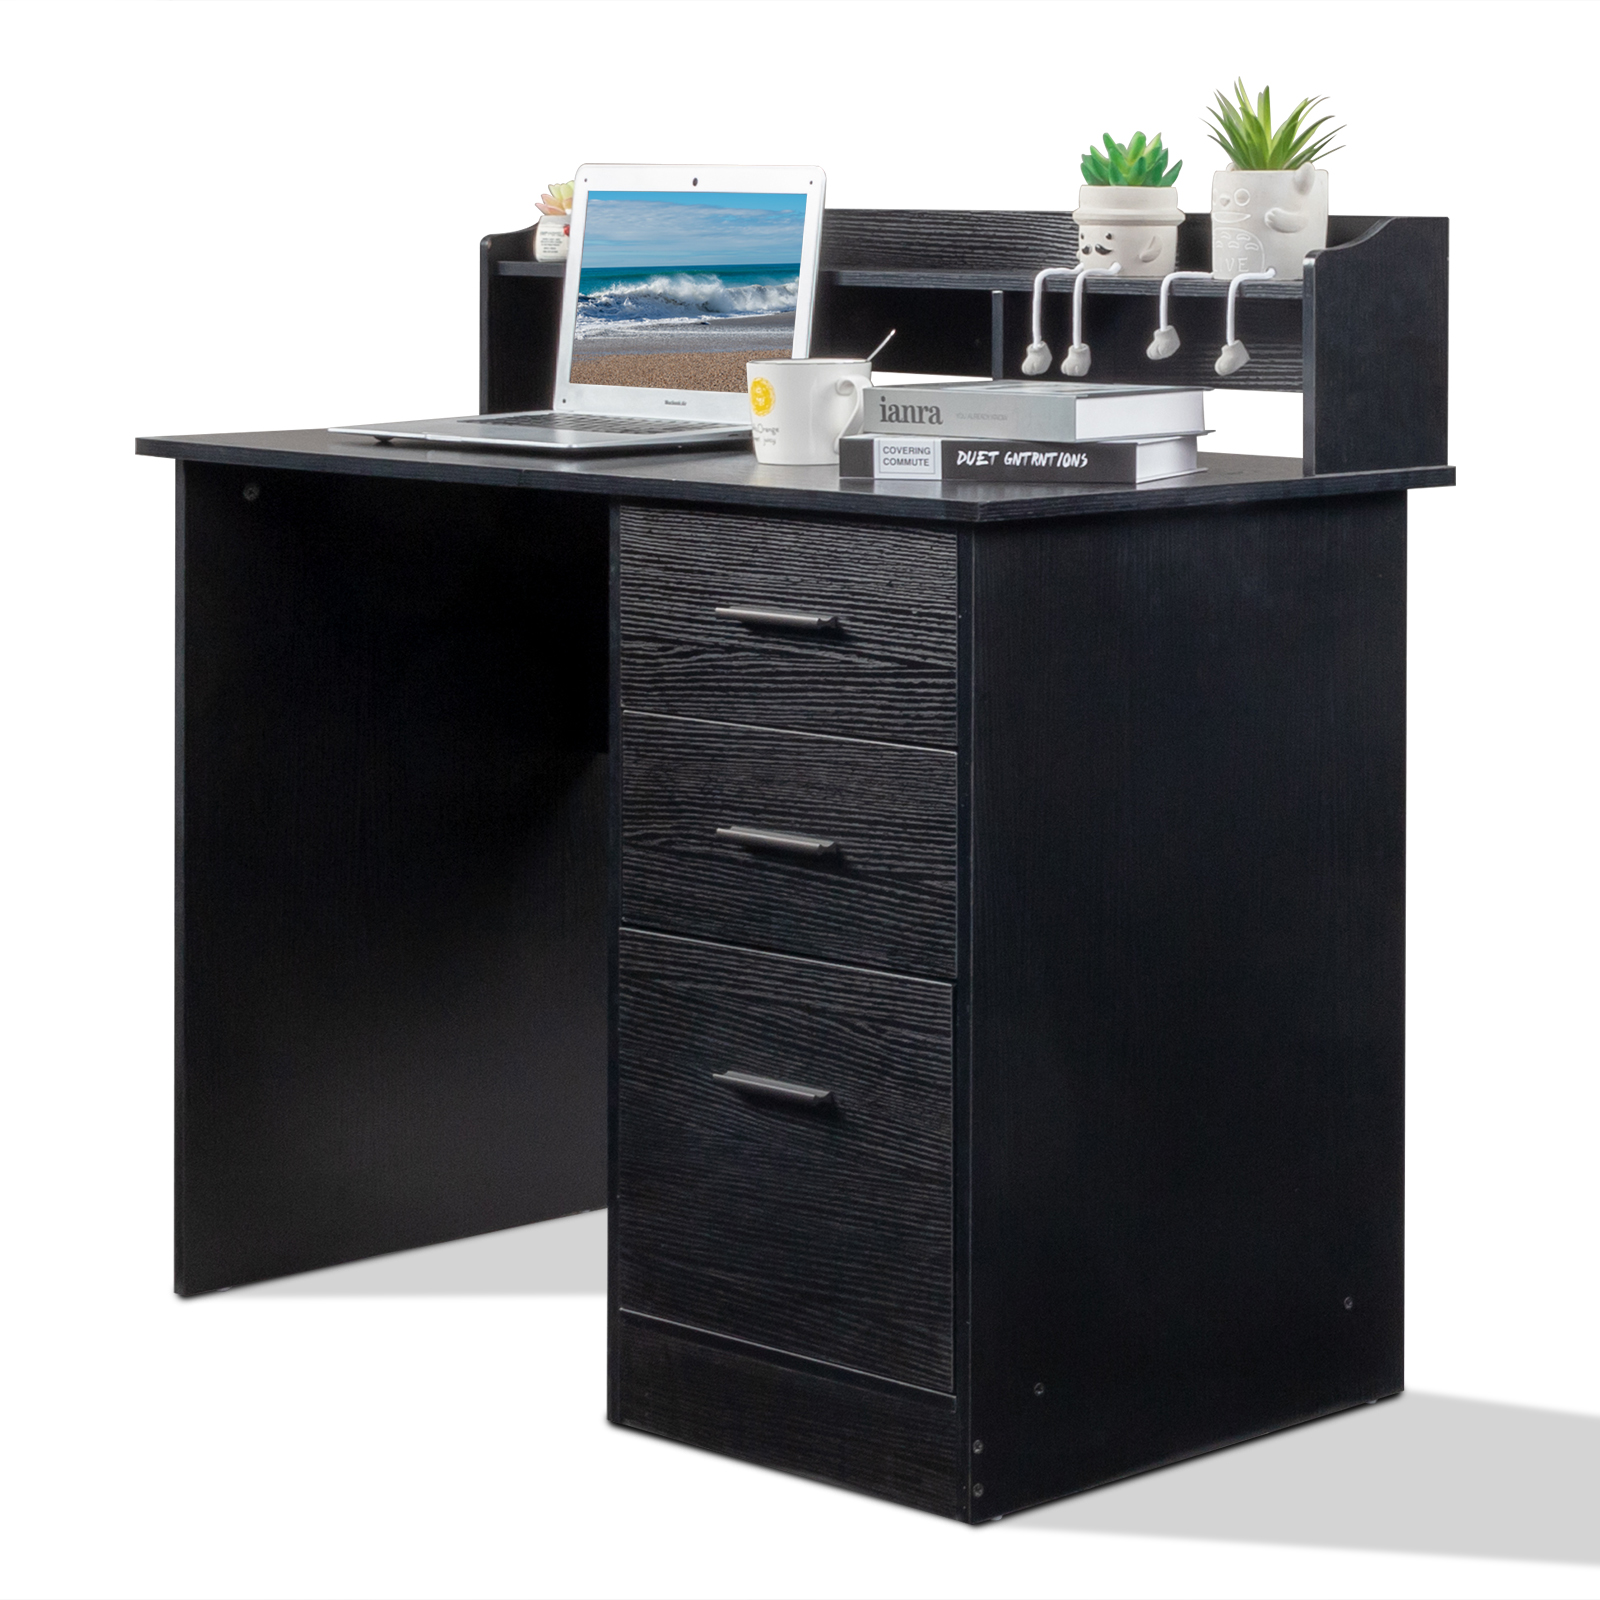 Ktaxon Wood Computer Desk Office Laptop PC Work Table, Writing Desk with 3 Drawers File Cabinet for Letter Size,Black - image 2 of 10